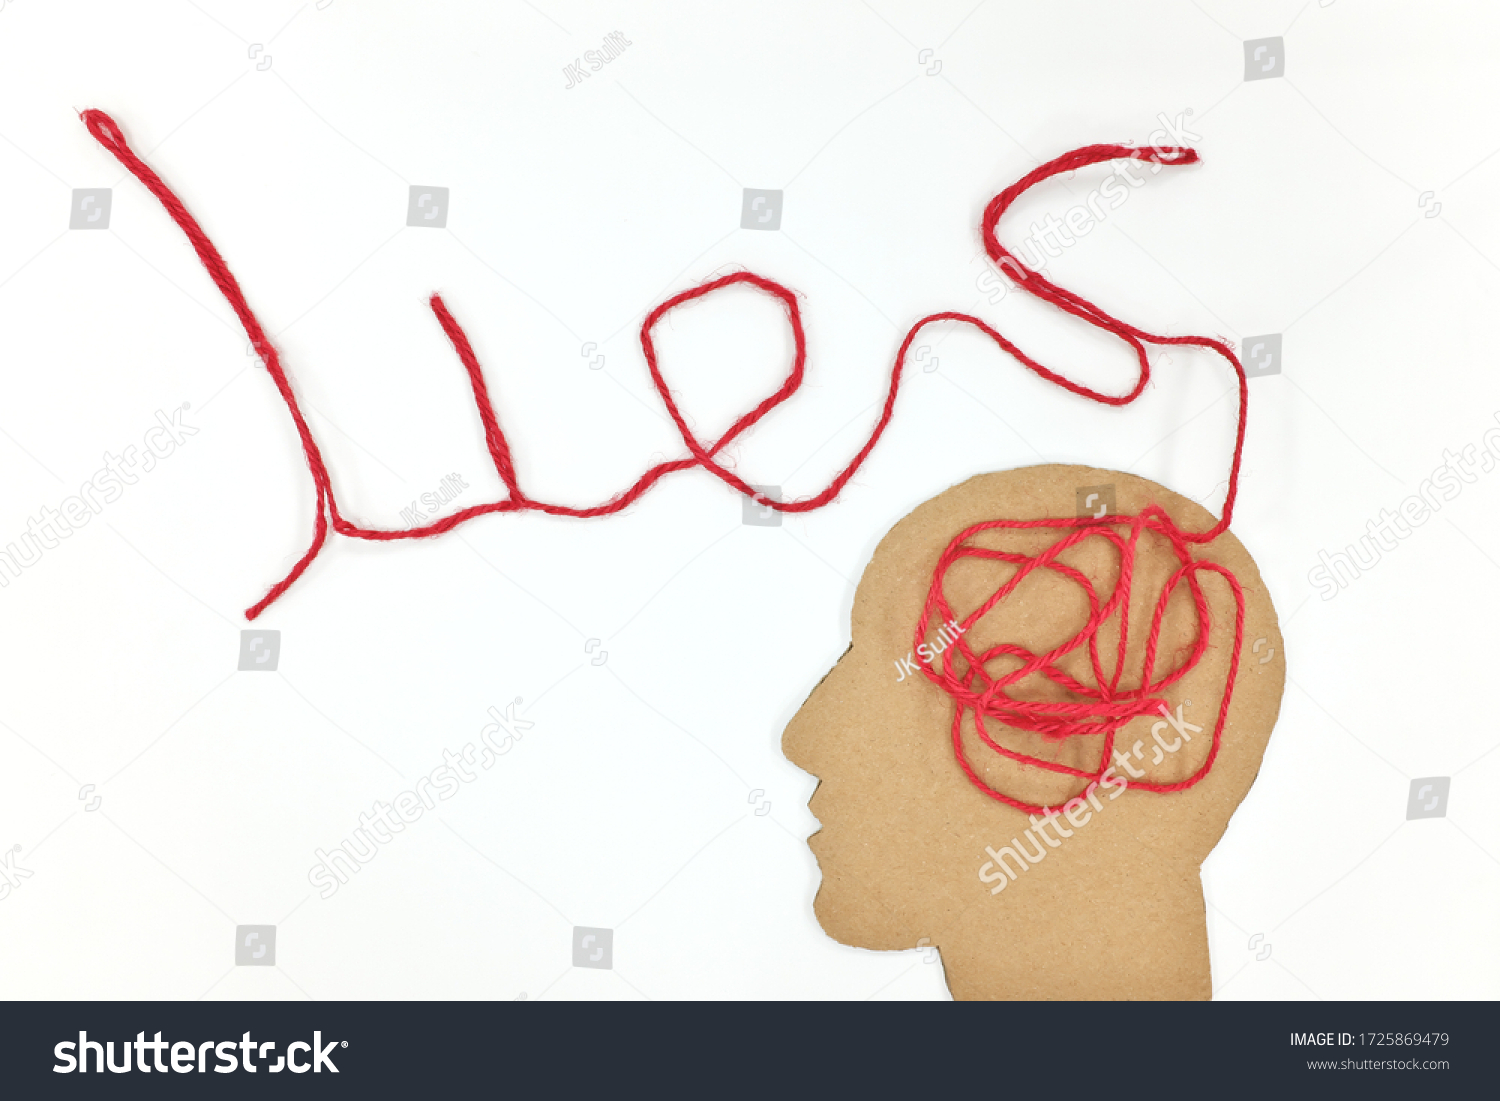 Lies, brainwashing and fake news concept. Human head profile silhouette with red yarn composed into word lies as brain gear. #1725869479